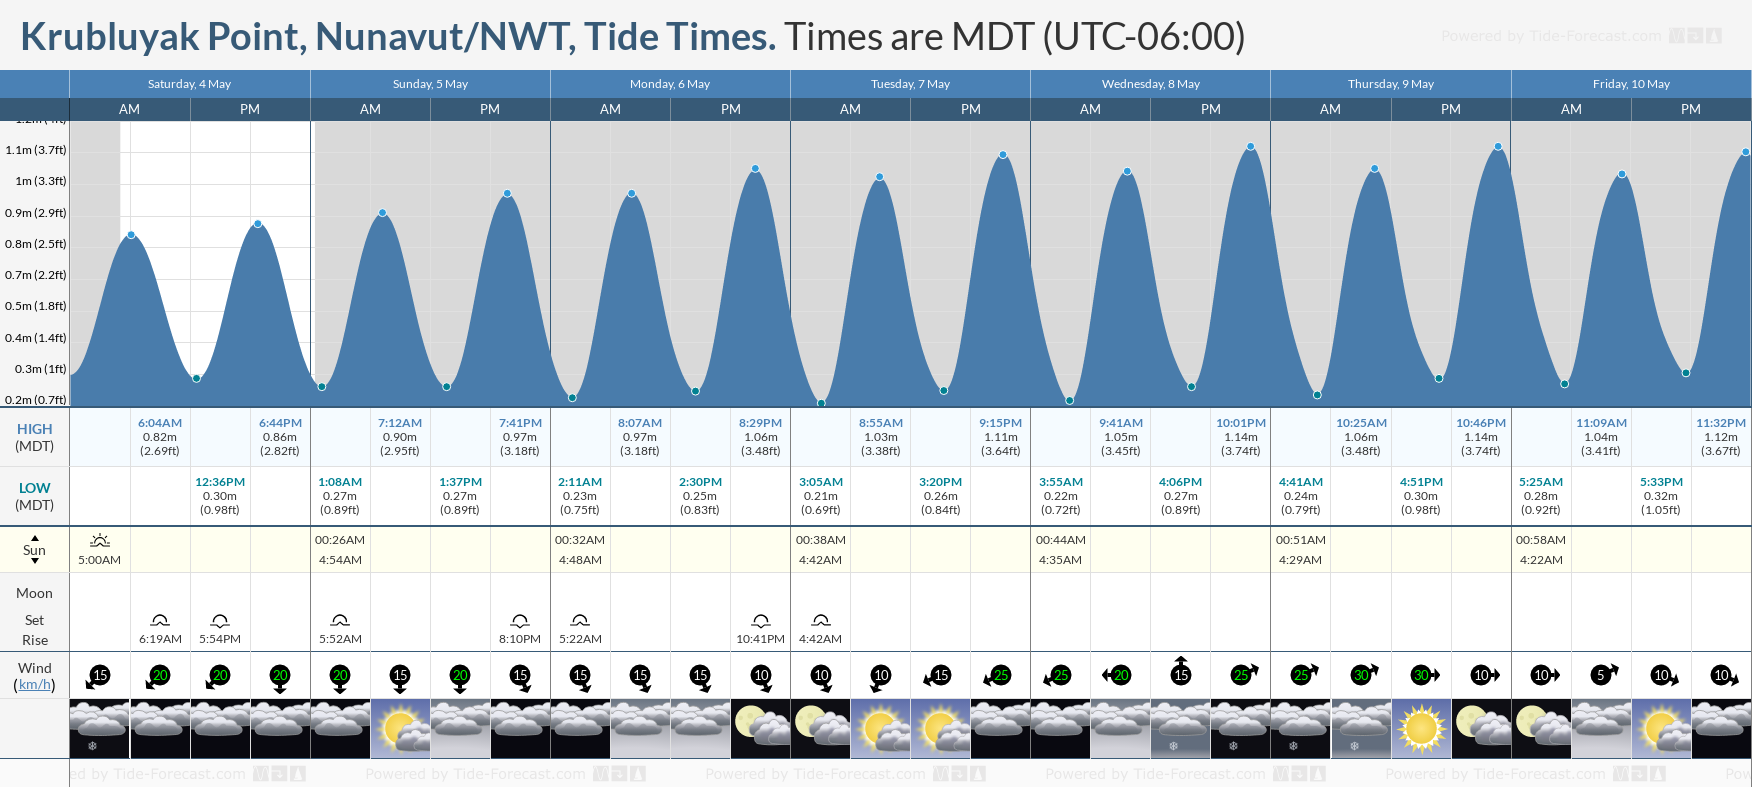 Krubluyak Point, Nunavut/NWT Tide Chart including high and low tide times for the next 7 days